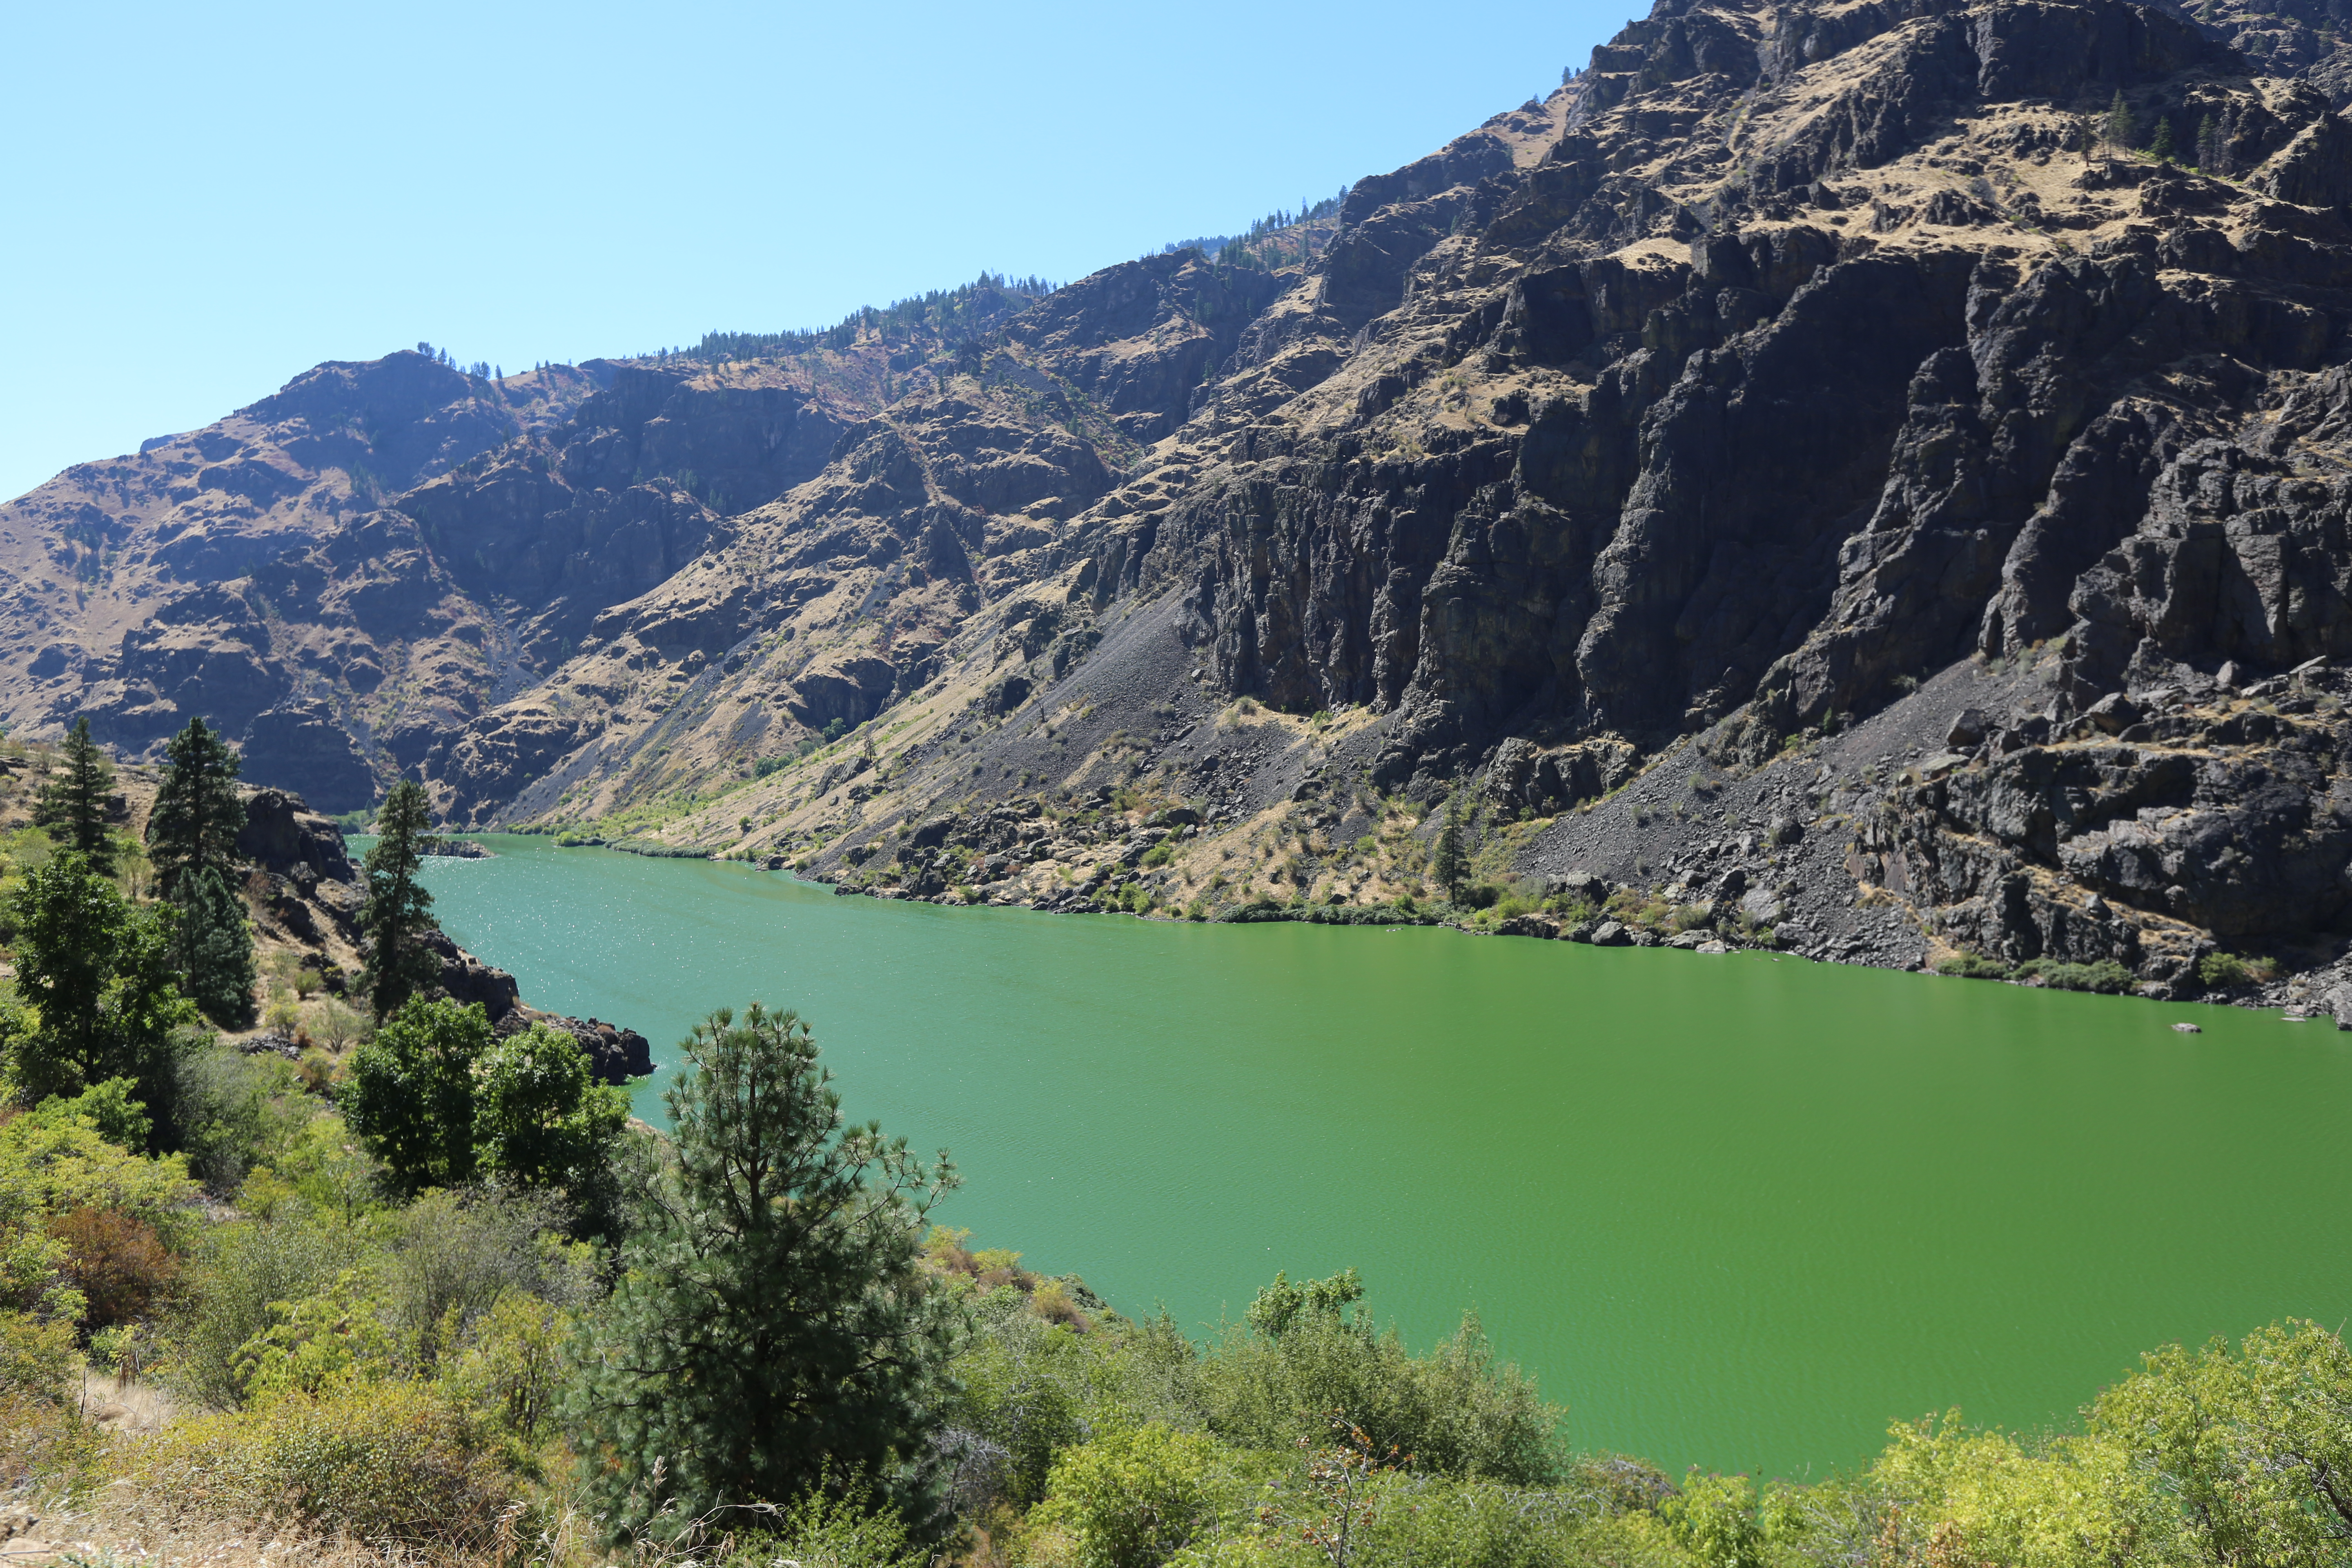 Looking upstream on the Snake River near the Hell's Canyon Dam